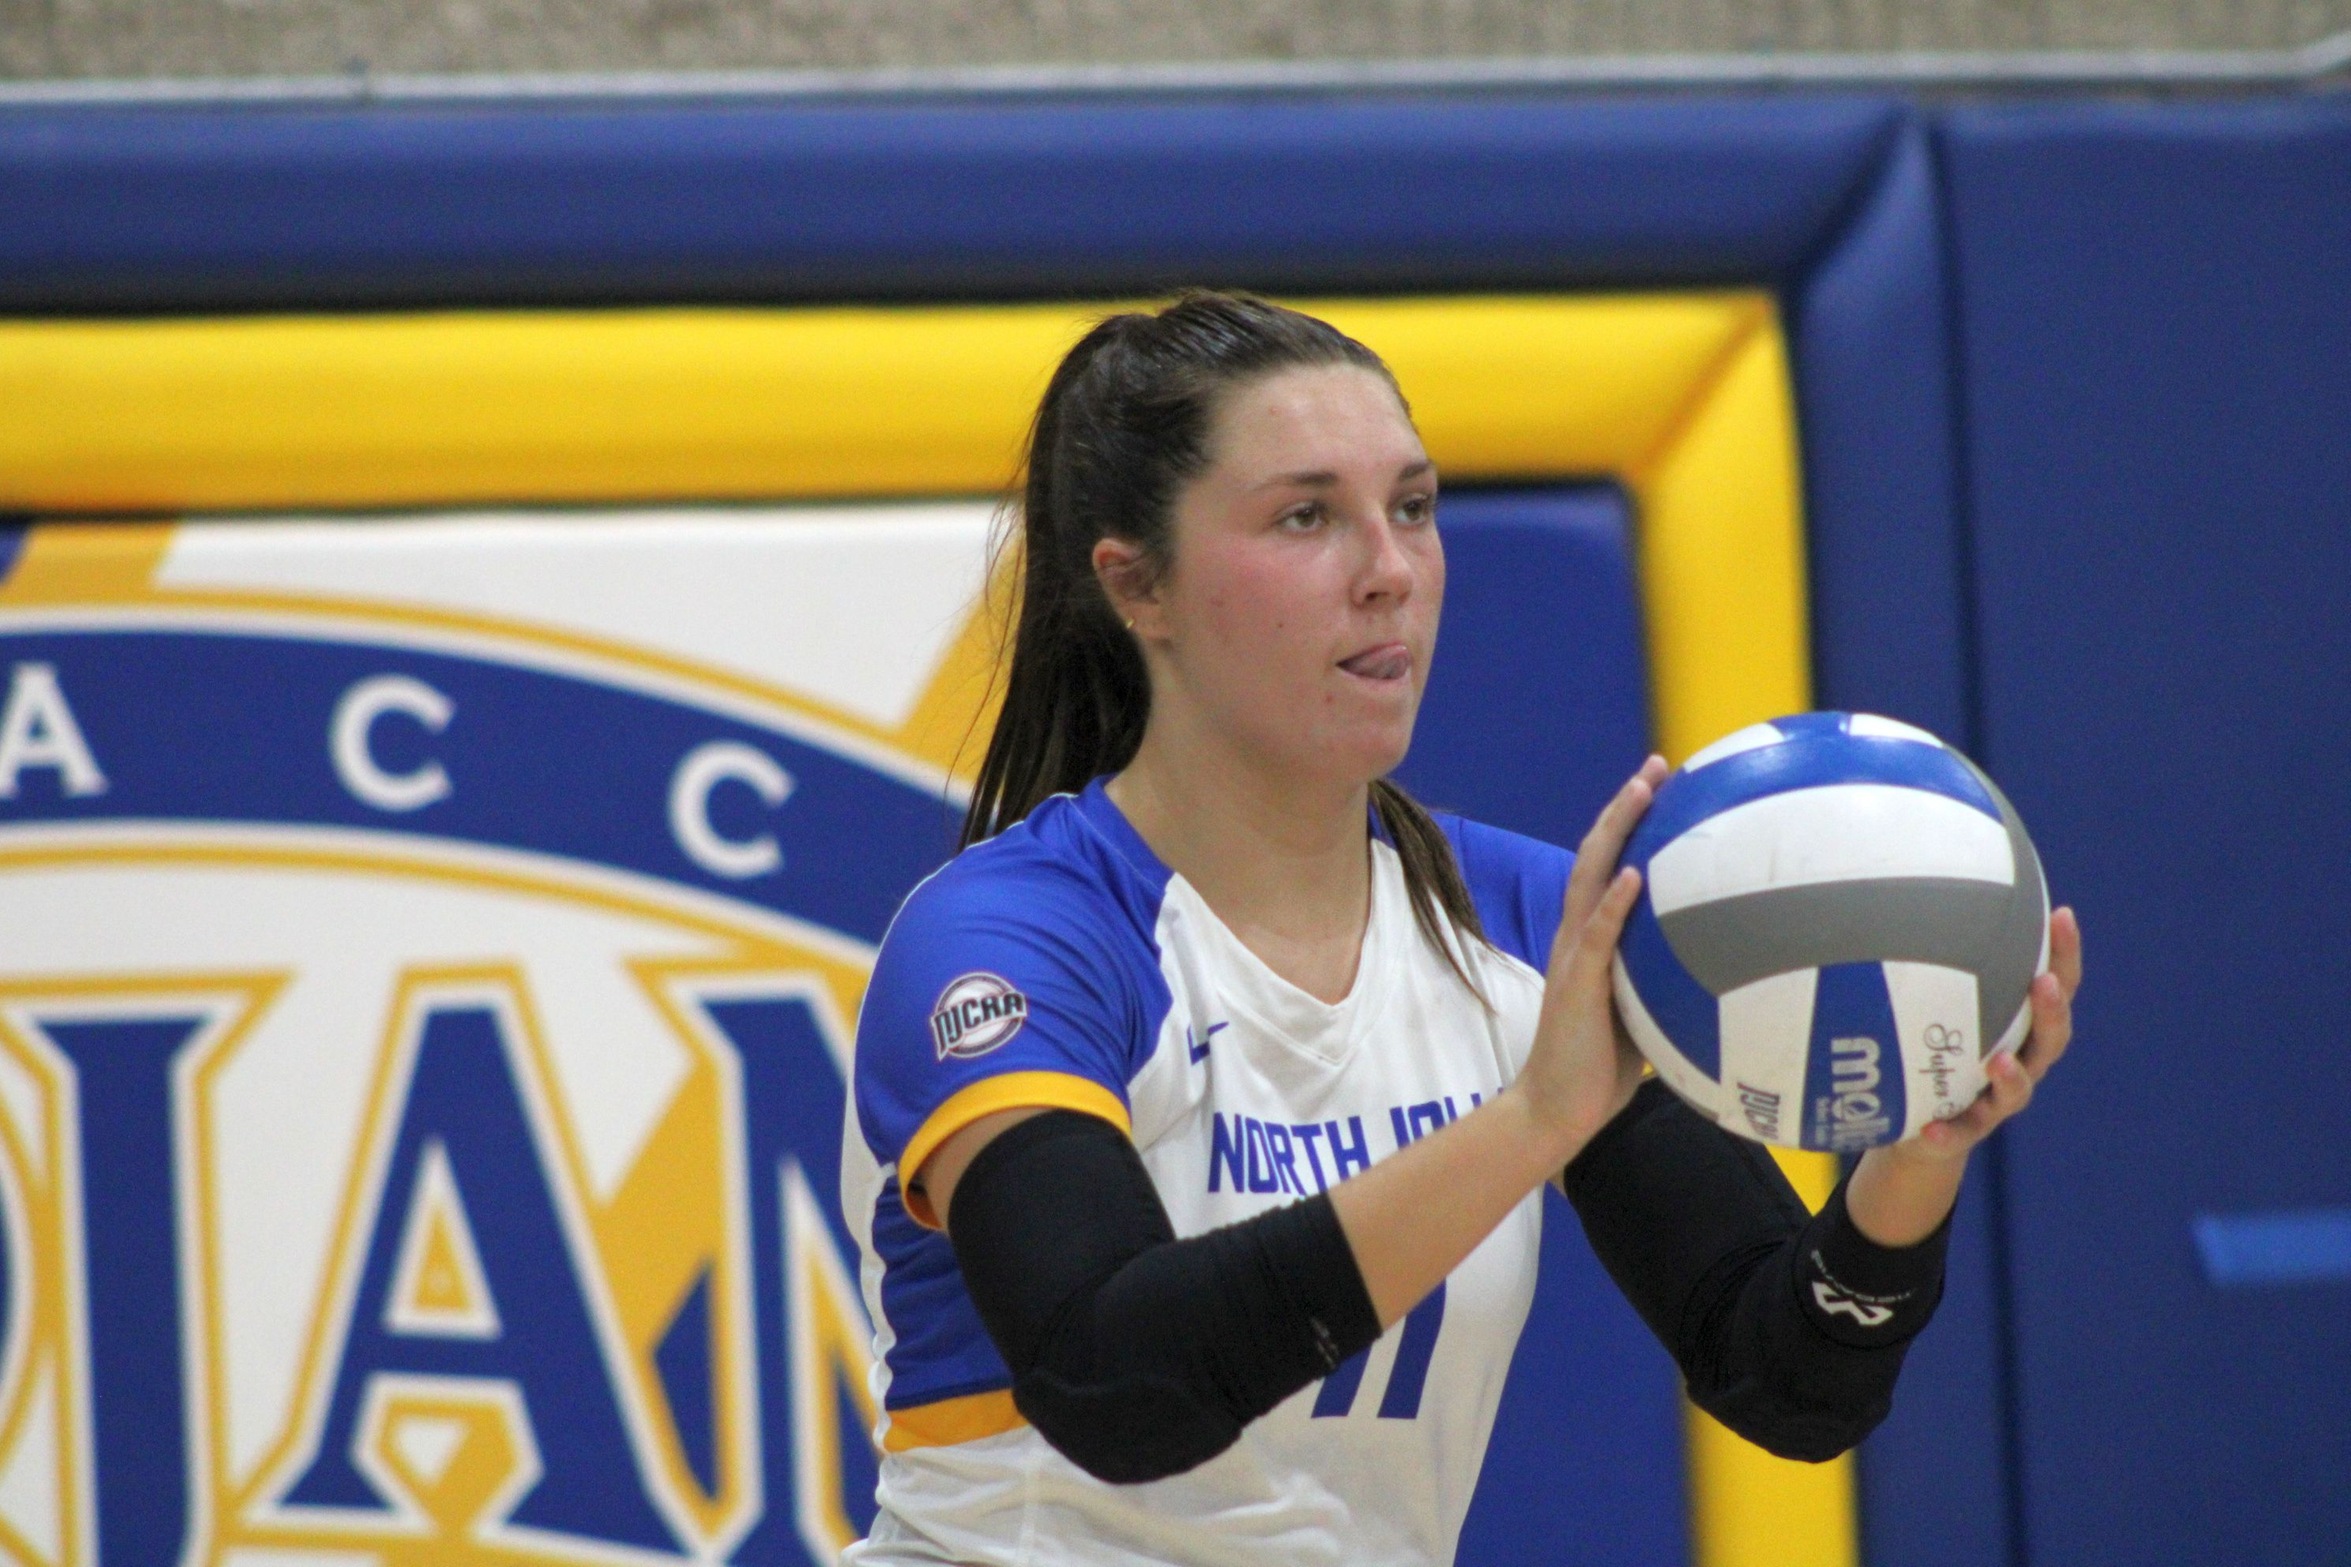 NIACC's Emily Opstvedt prepares to serve in a match against Northeast CC earlier this season.